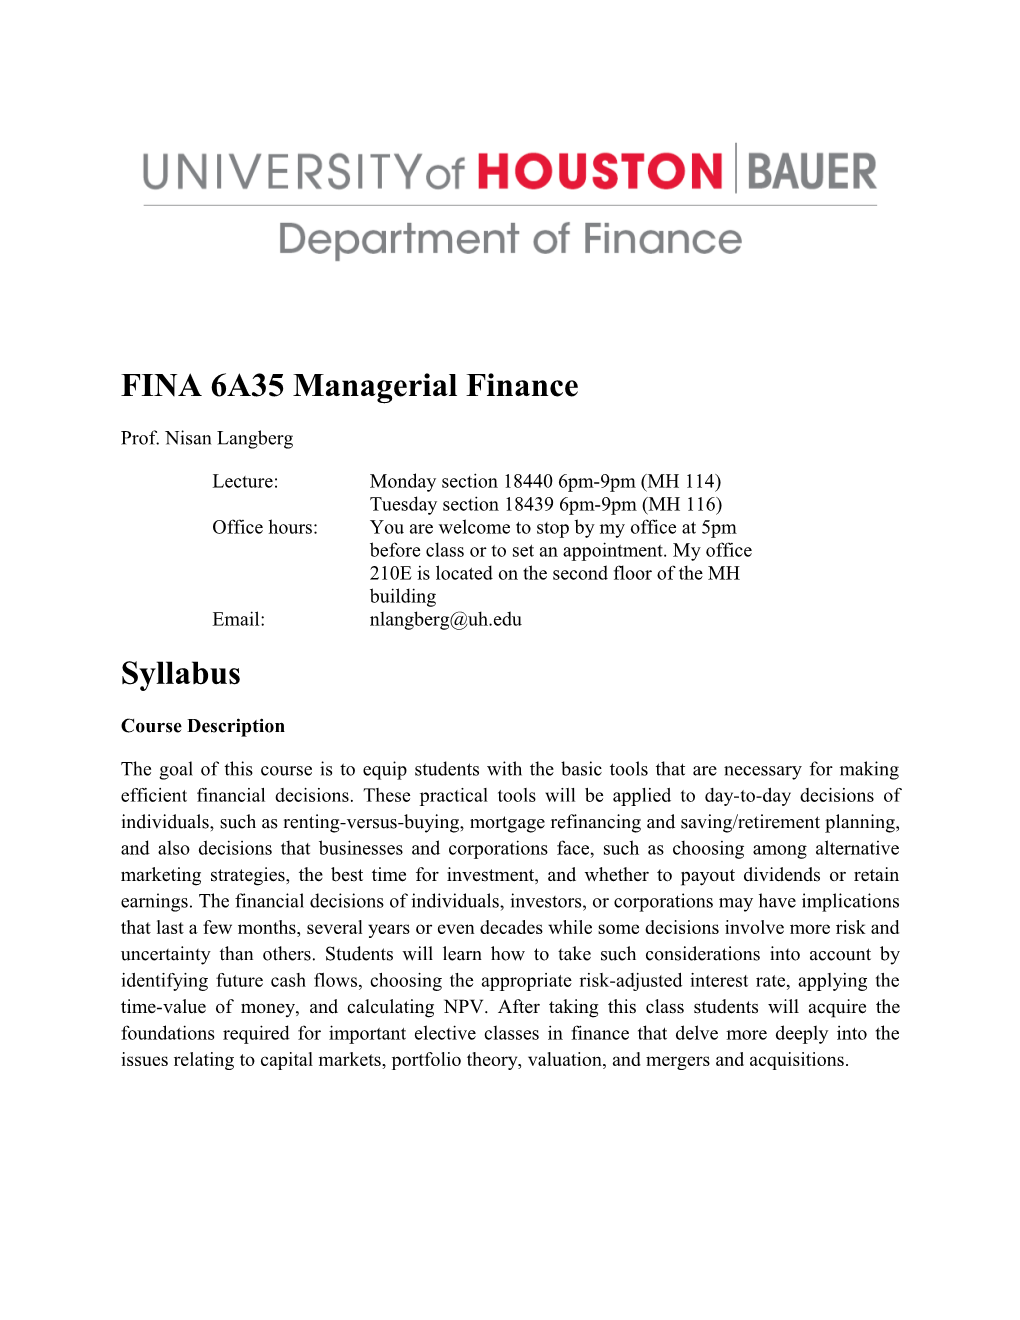 FINA 6A35 Managerial Finance